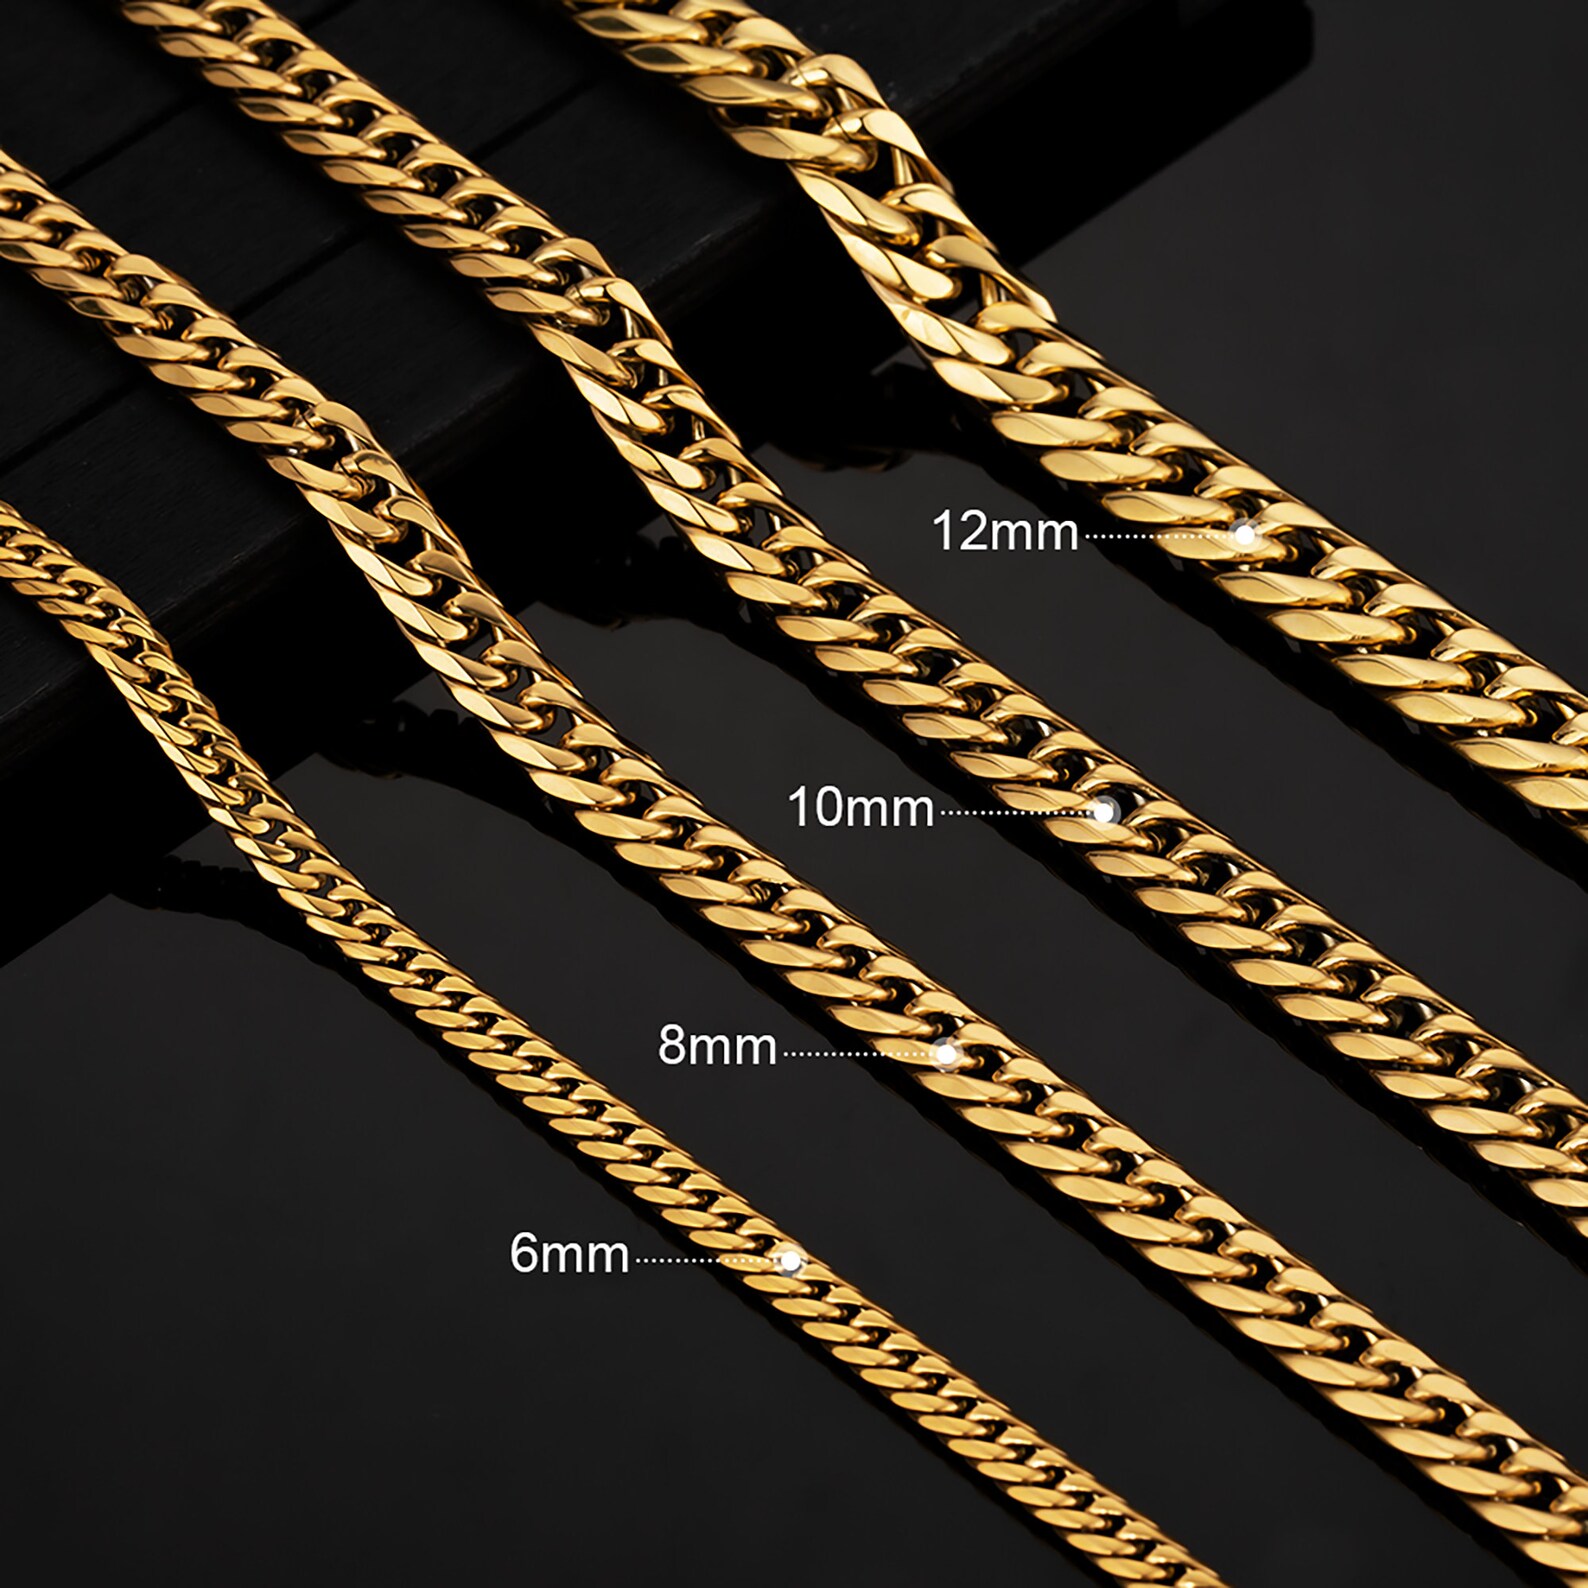 White Gold Silver Miami Cuban Link Chain 6mm / 8mm / 10mm / - Etsy